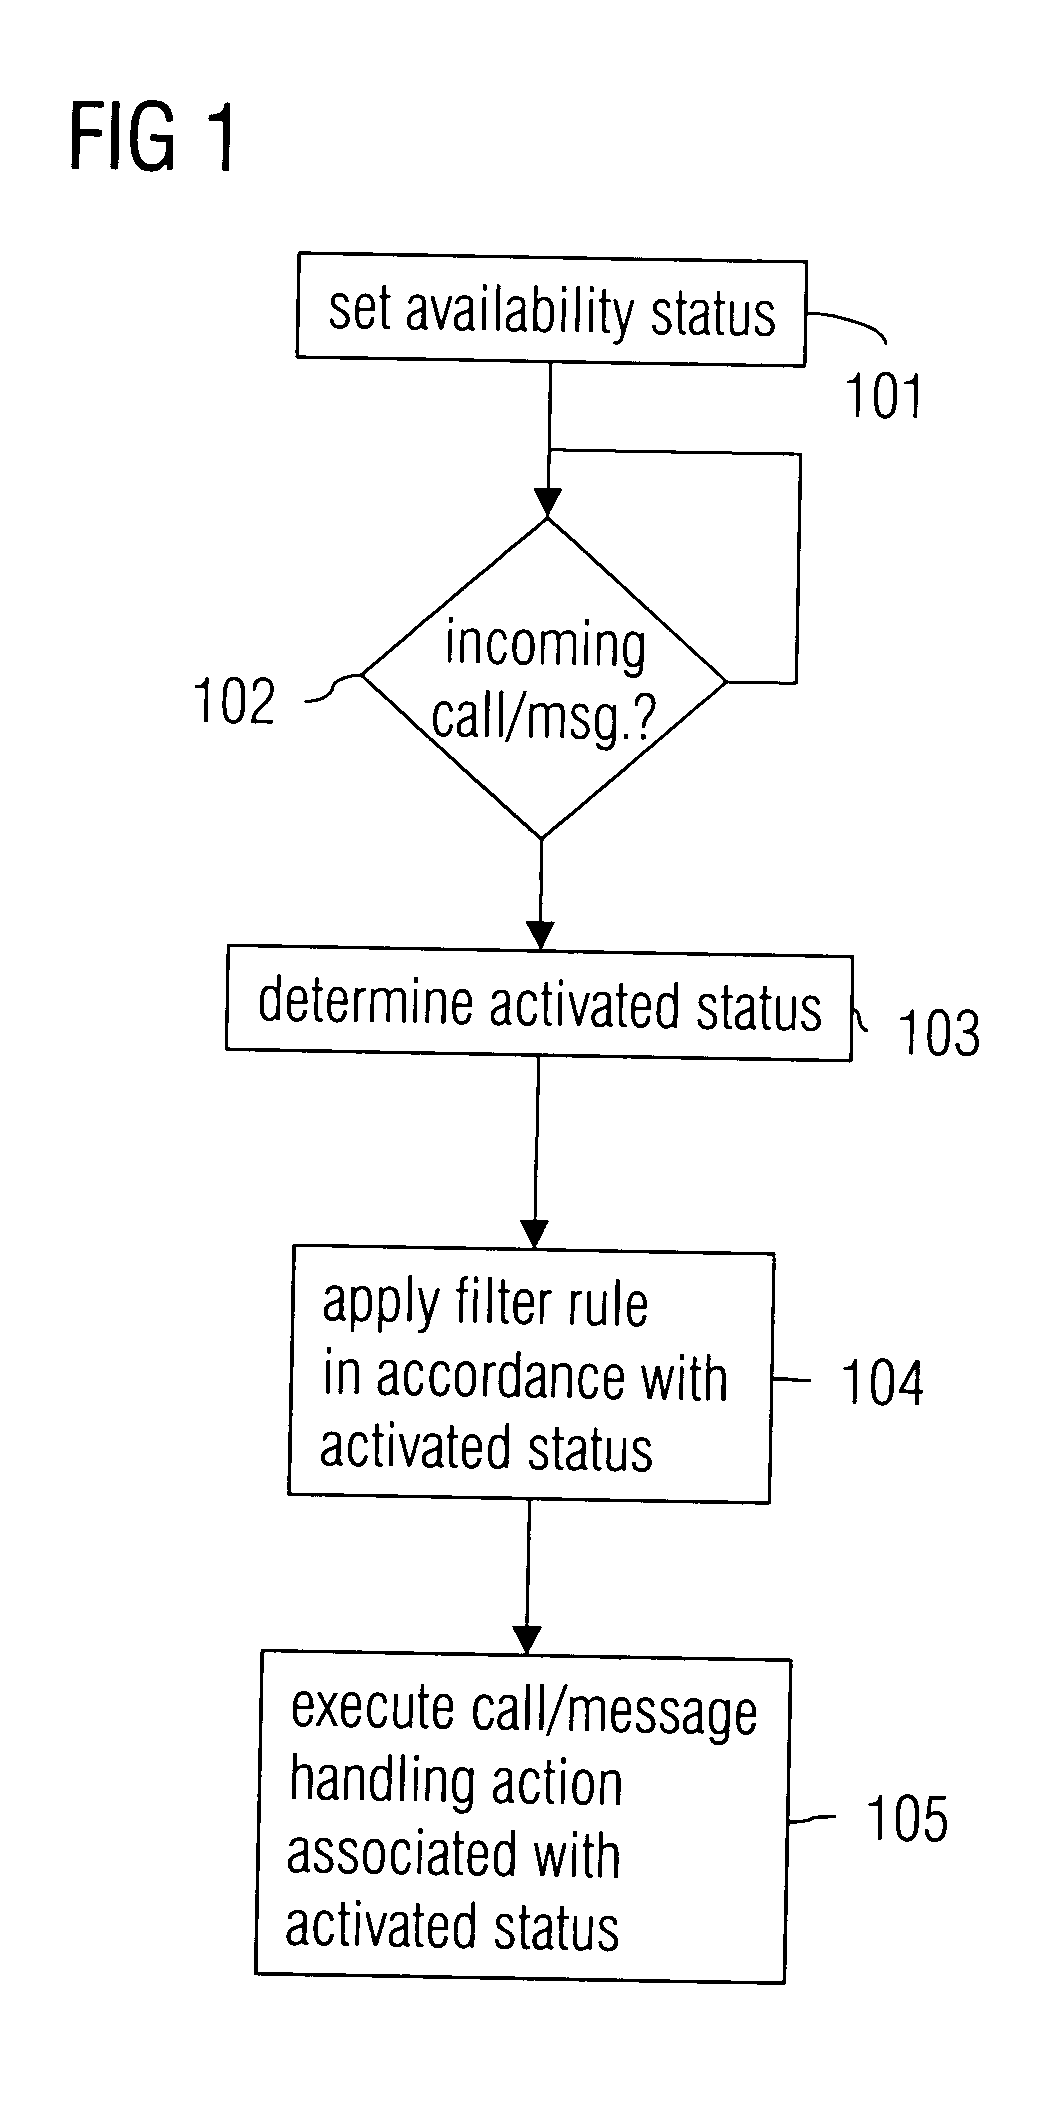 Managing incoming calls and/or messages in a communications system